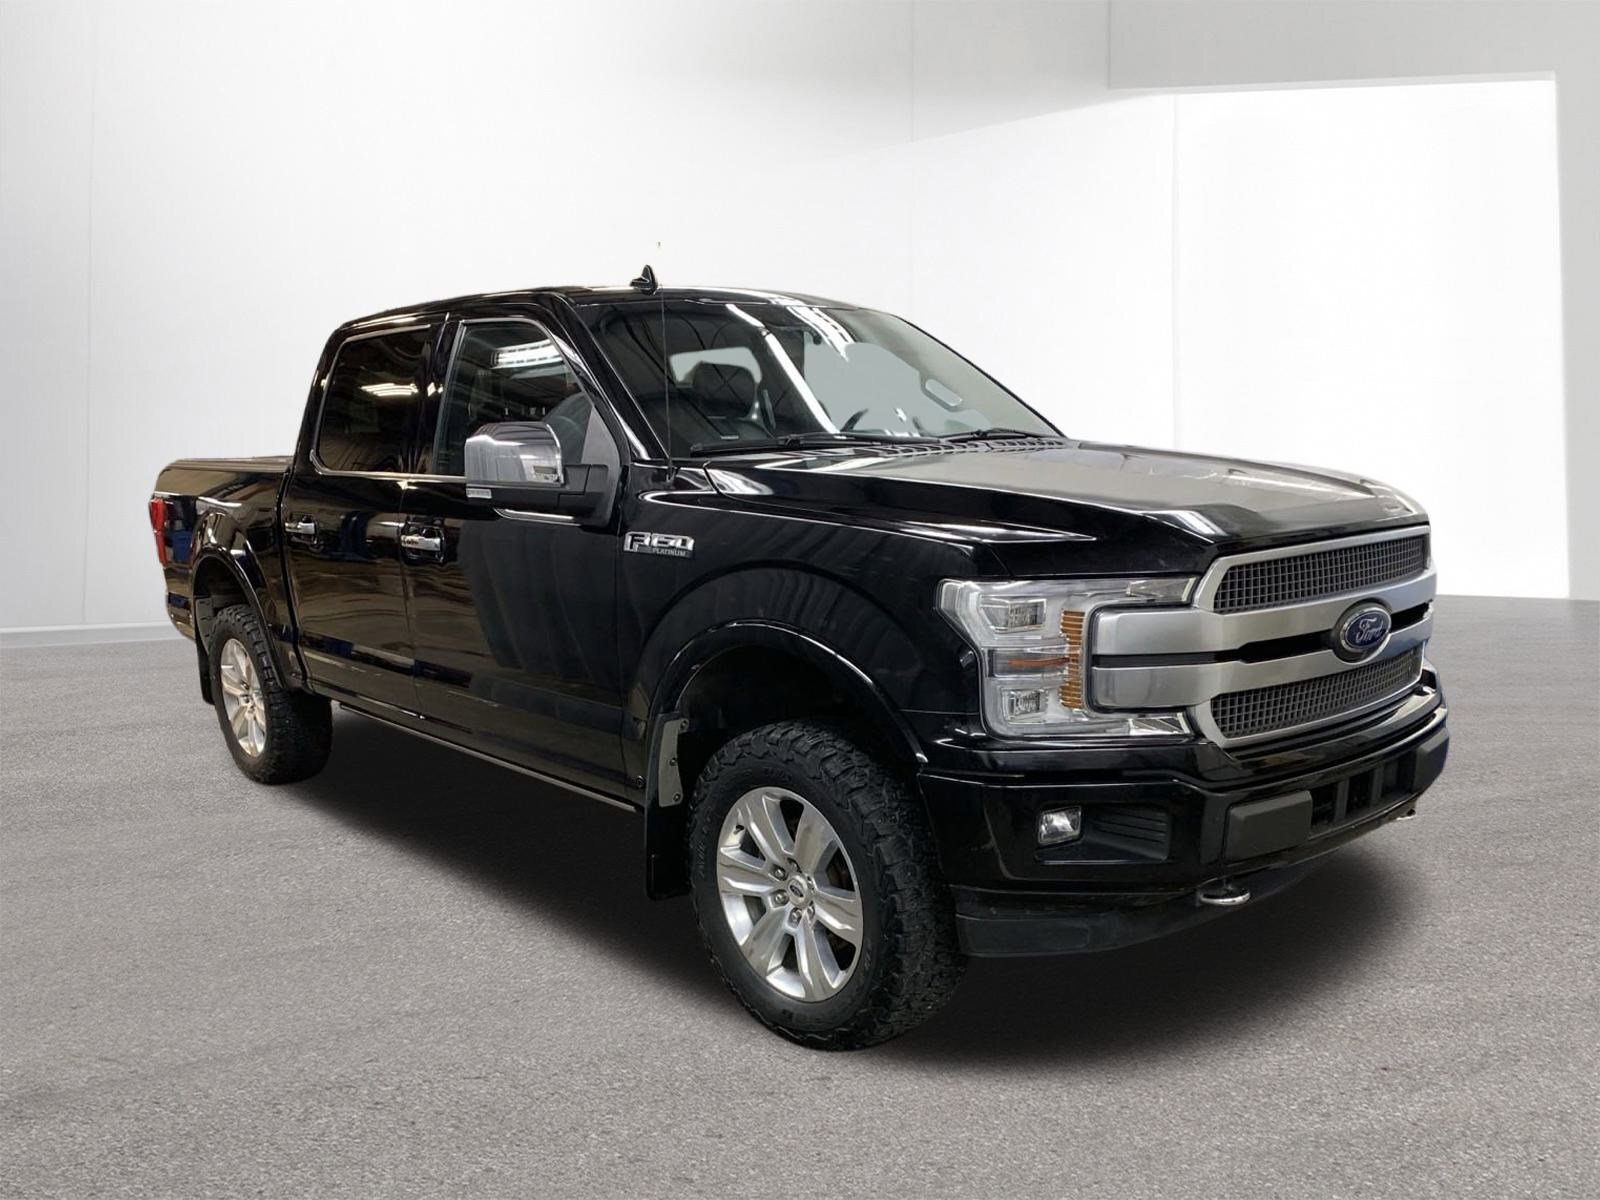 2018 Ford F-150 PLATINUM WITH EXTENDED WARRANTY AND MAINTENANCE PL